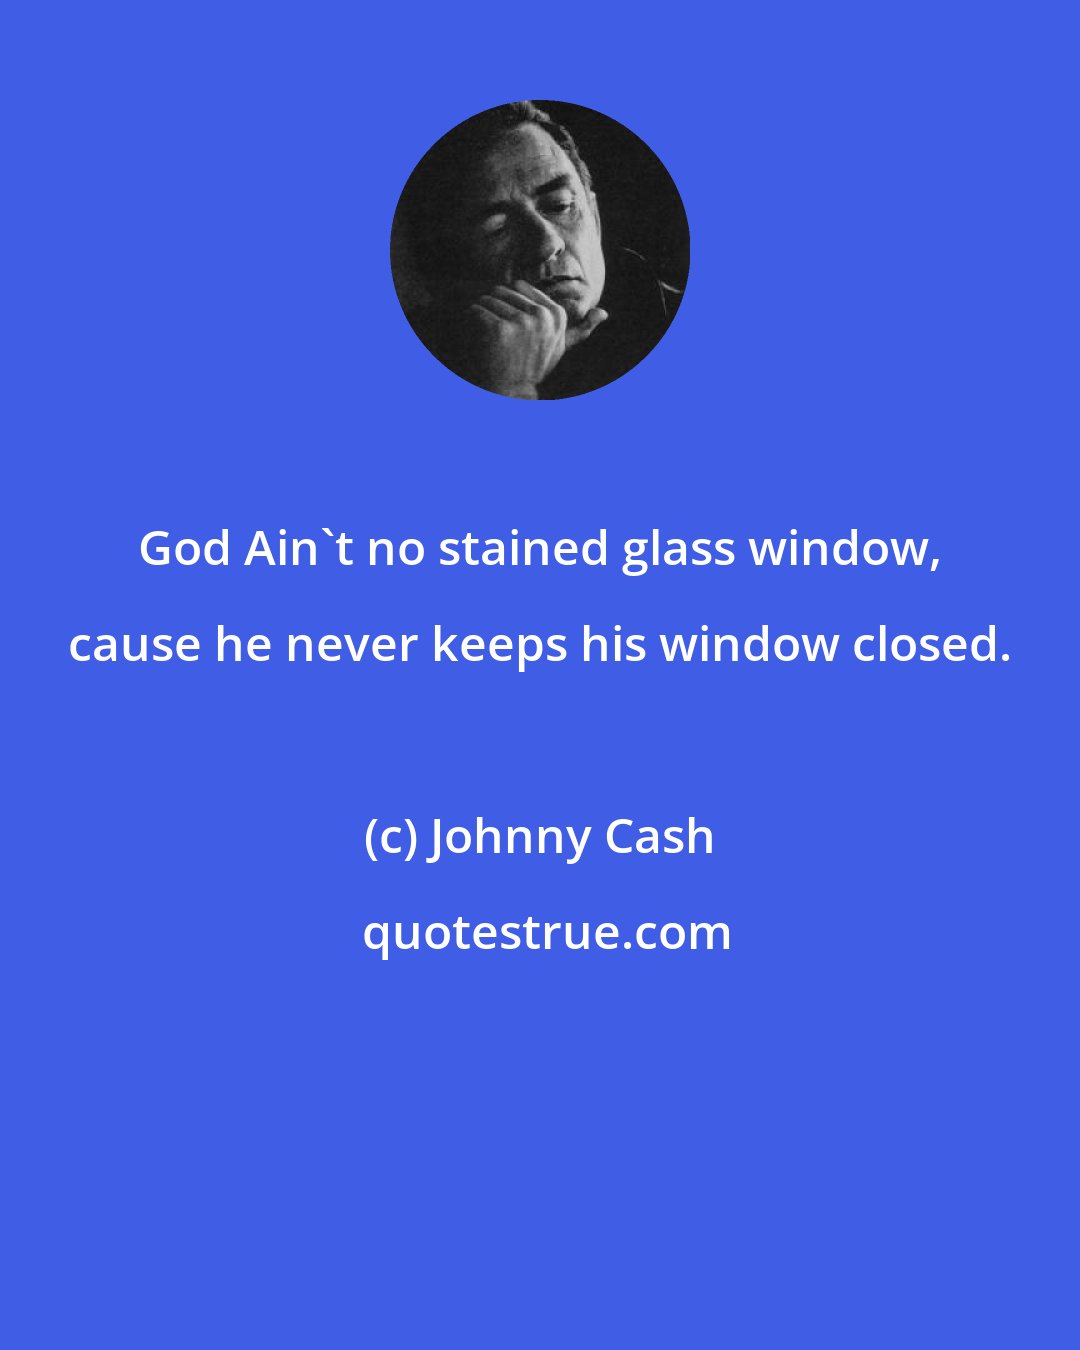 Johnny Cash: God Ain't no stained glass window, cause he never keeps his window closed.